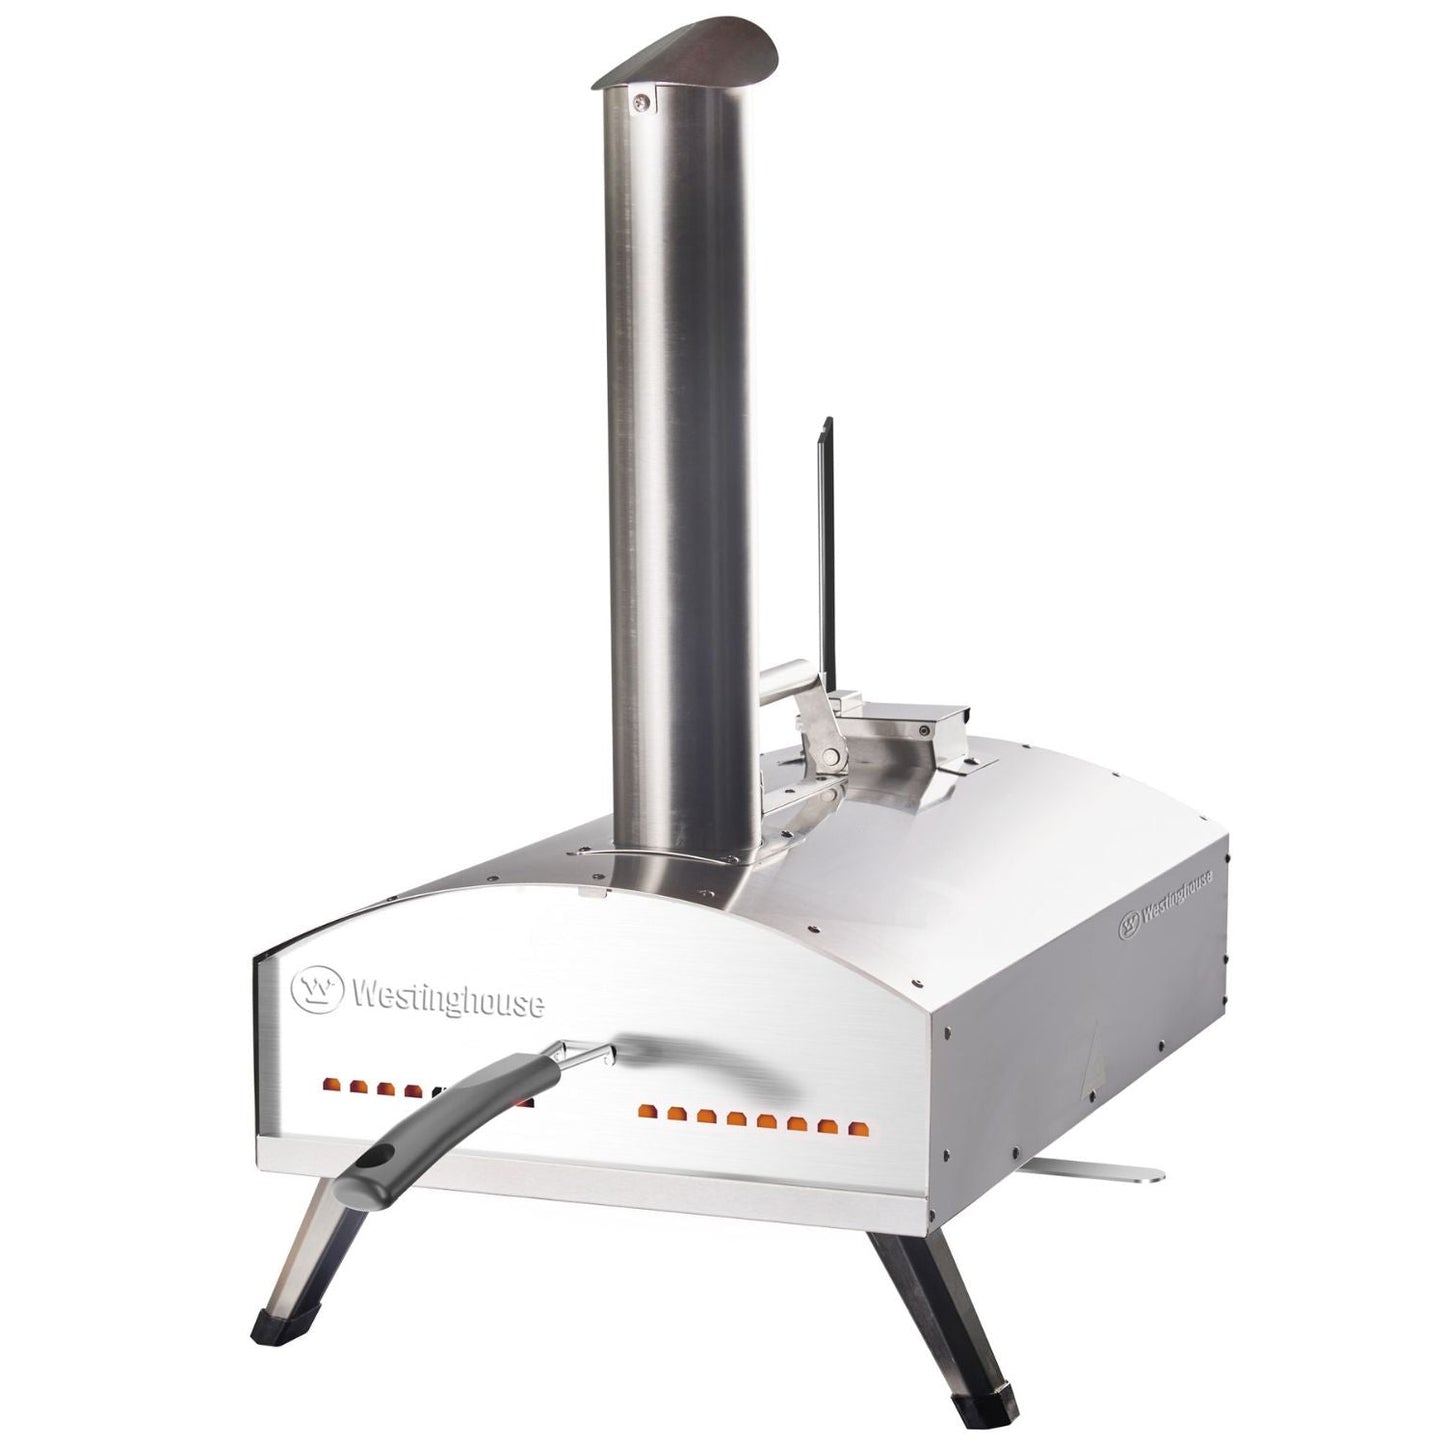 12" Wood Pellet Pizza Oven with Rotating Stone